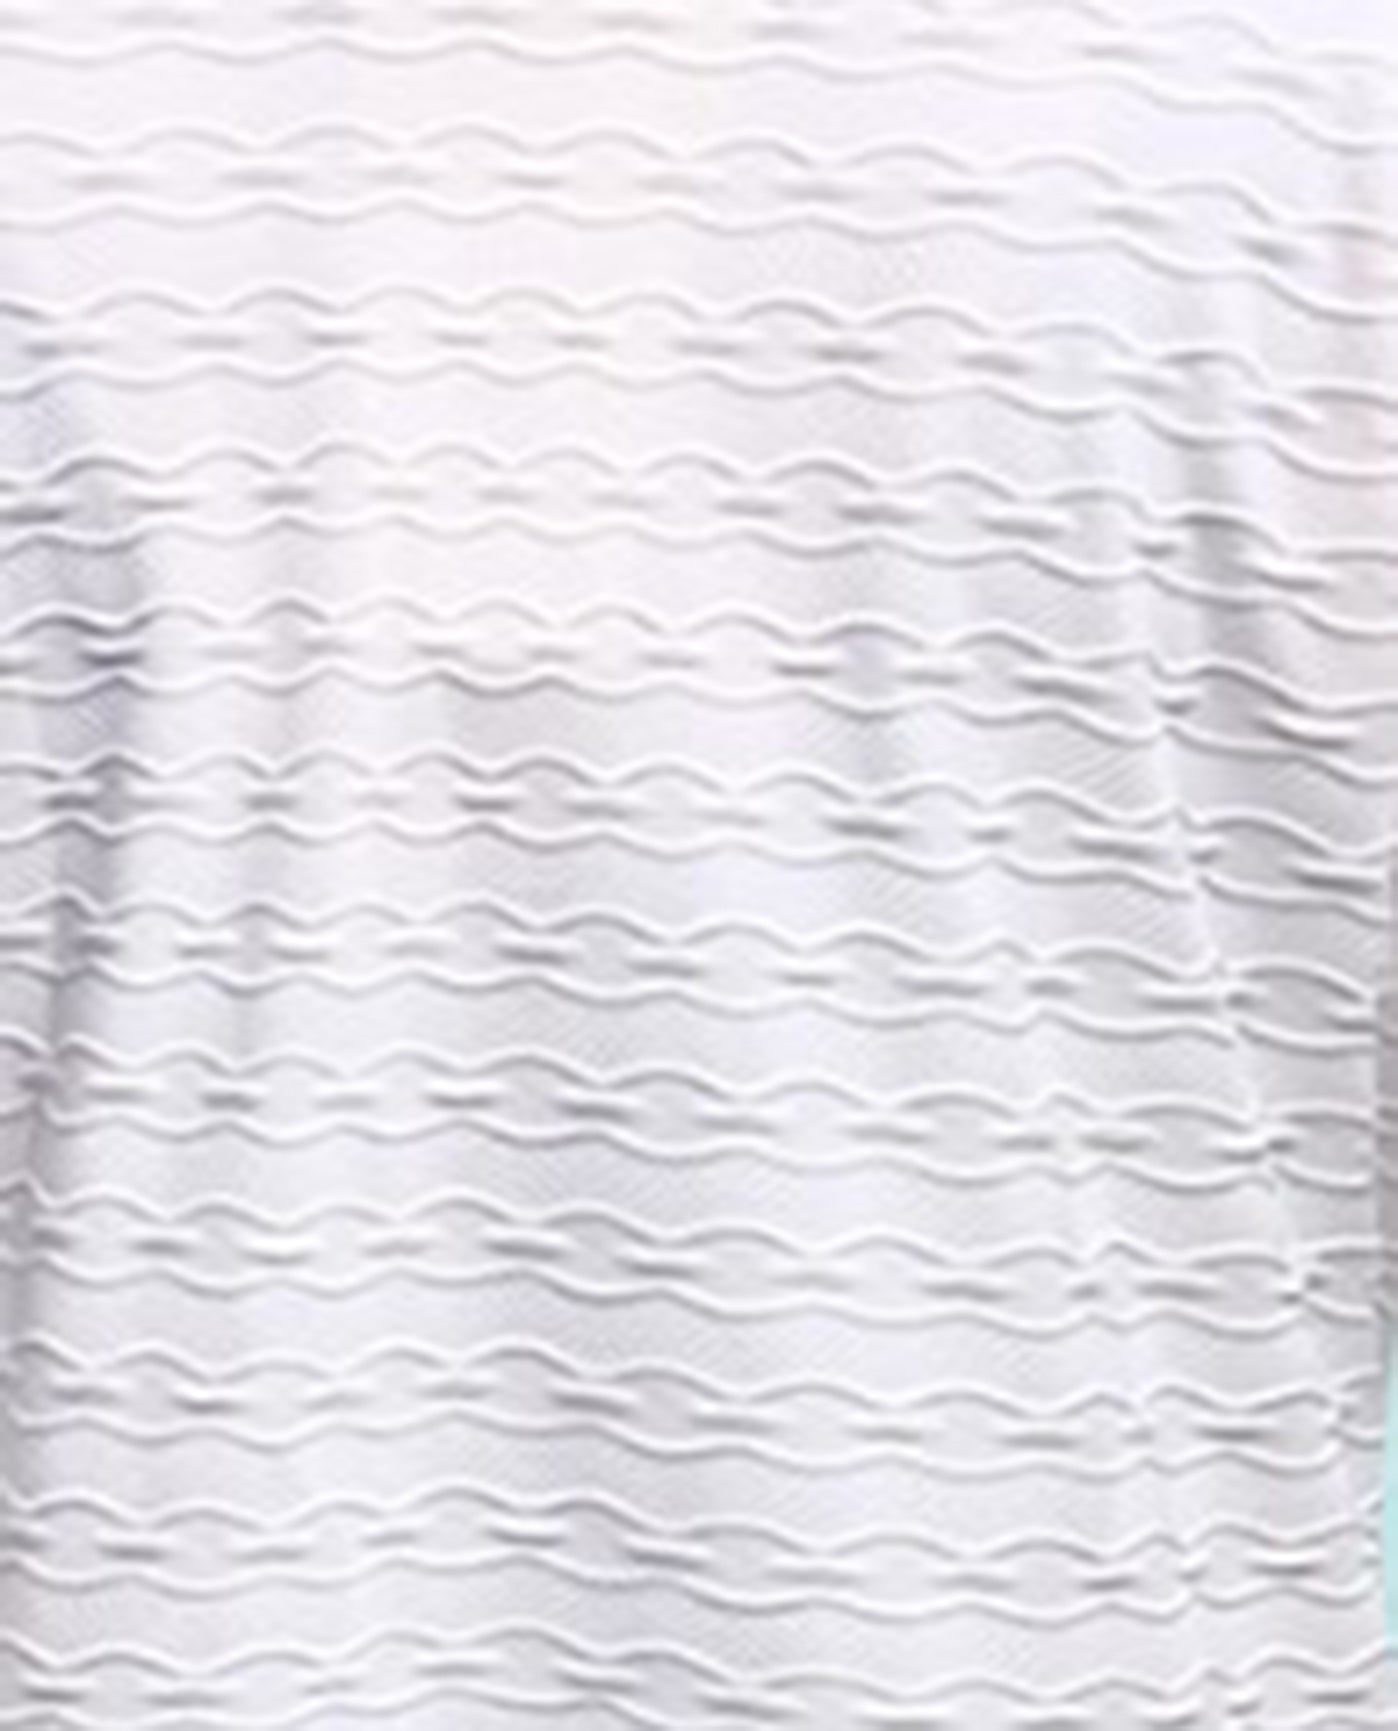 FABRIC SWATCH VIEW OF AQUAMORE SOLID TEXTURED CAP SLEEVE BUTTON UP COVER UP TUNIC | 016 AQM TEXTURED CREAM